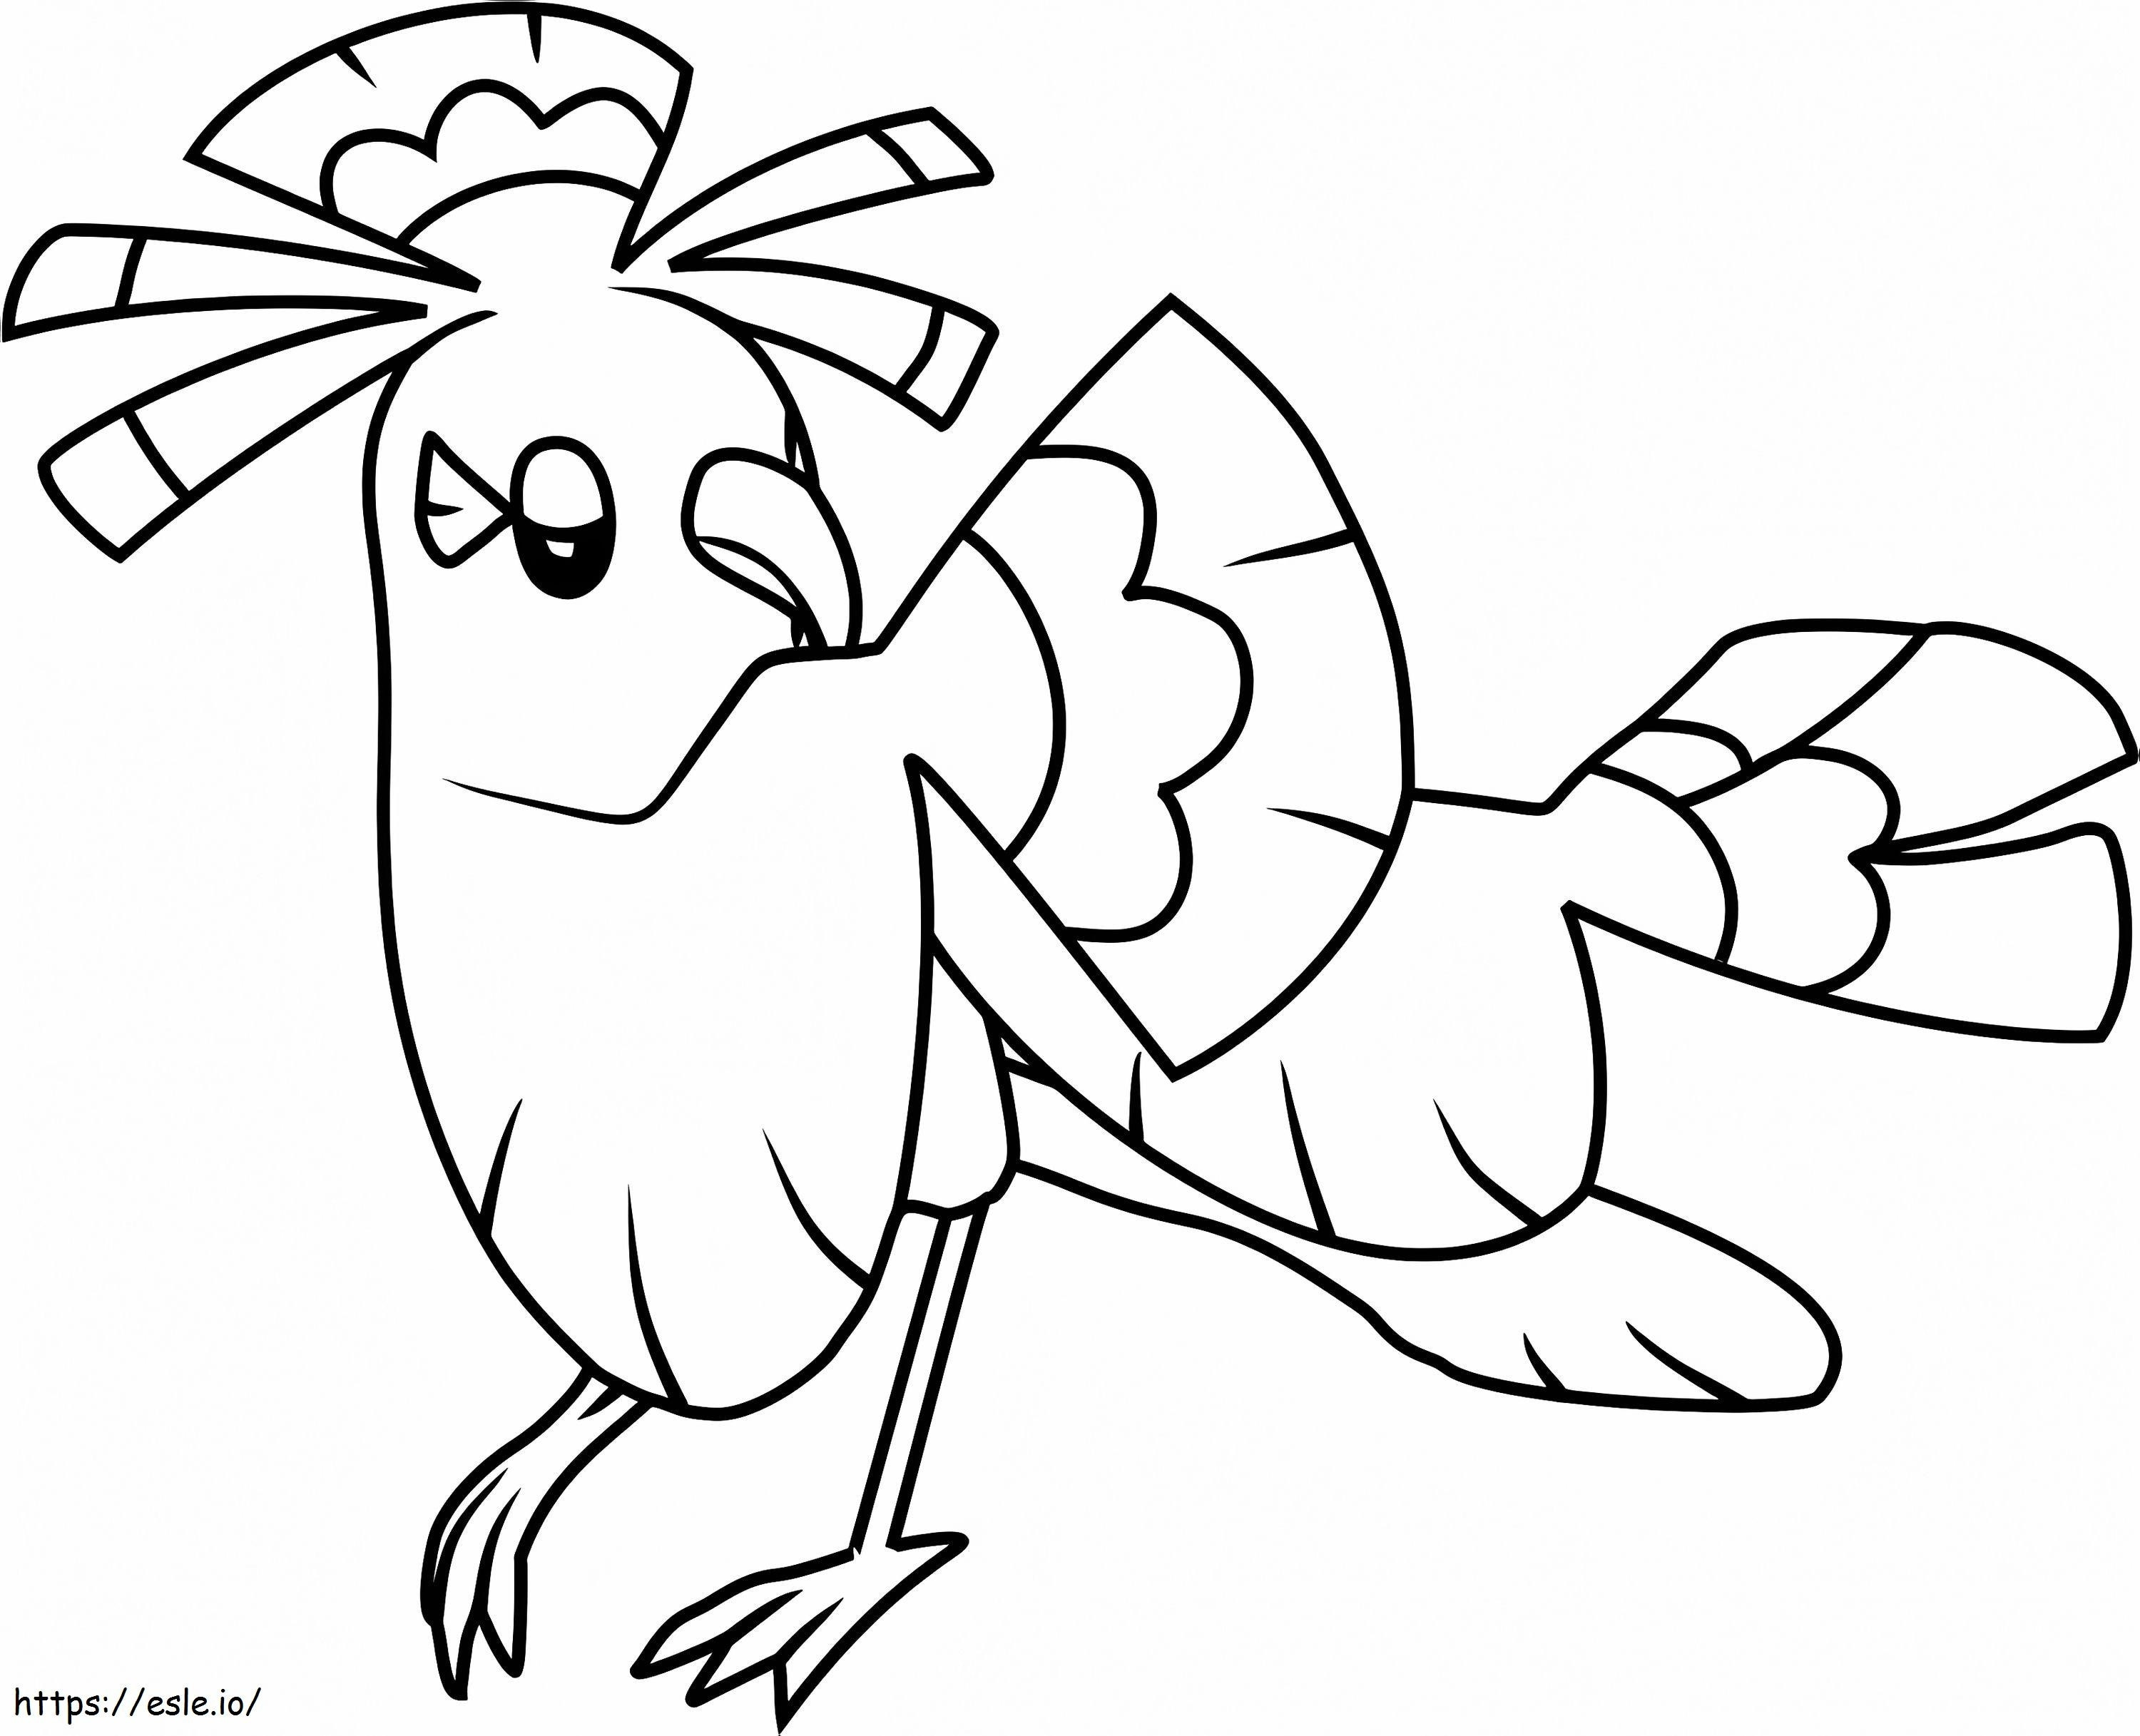 22 coloring page